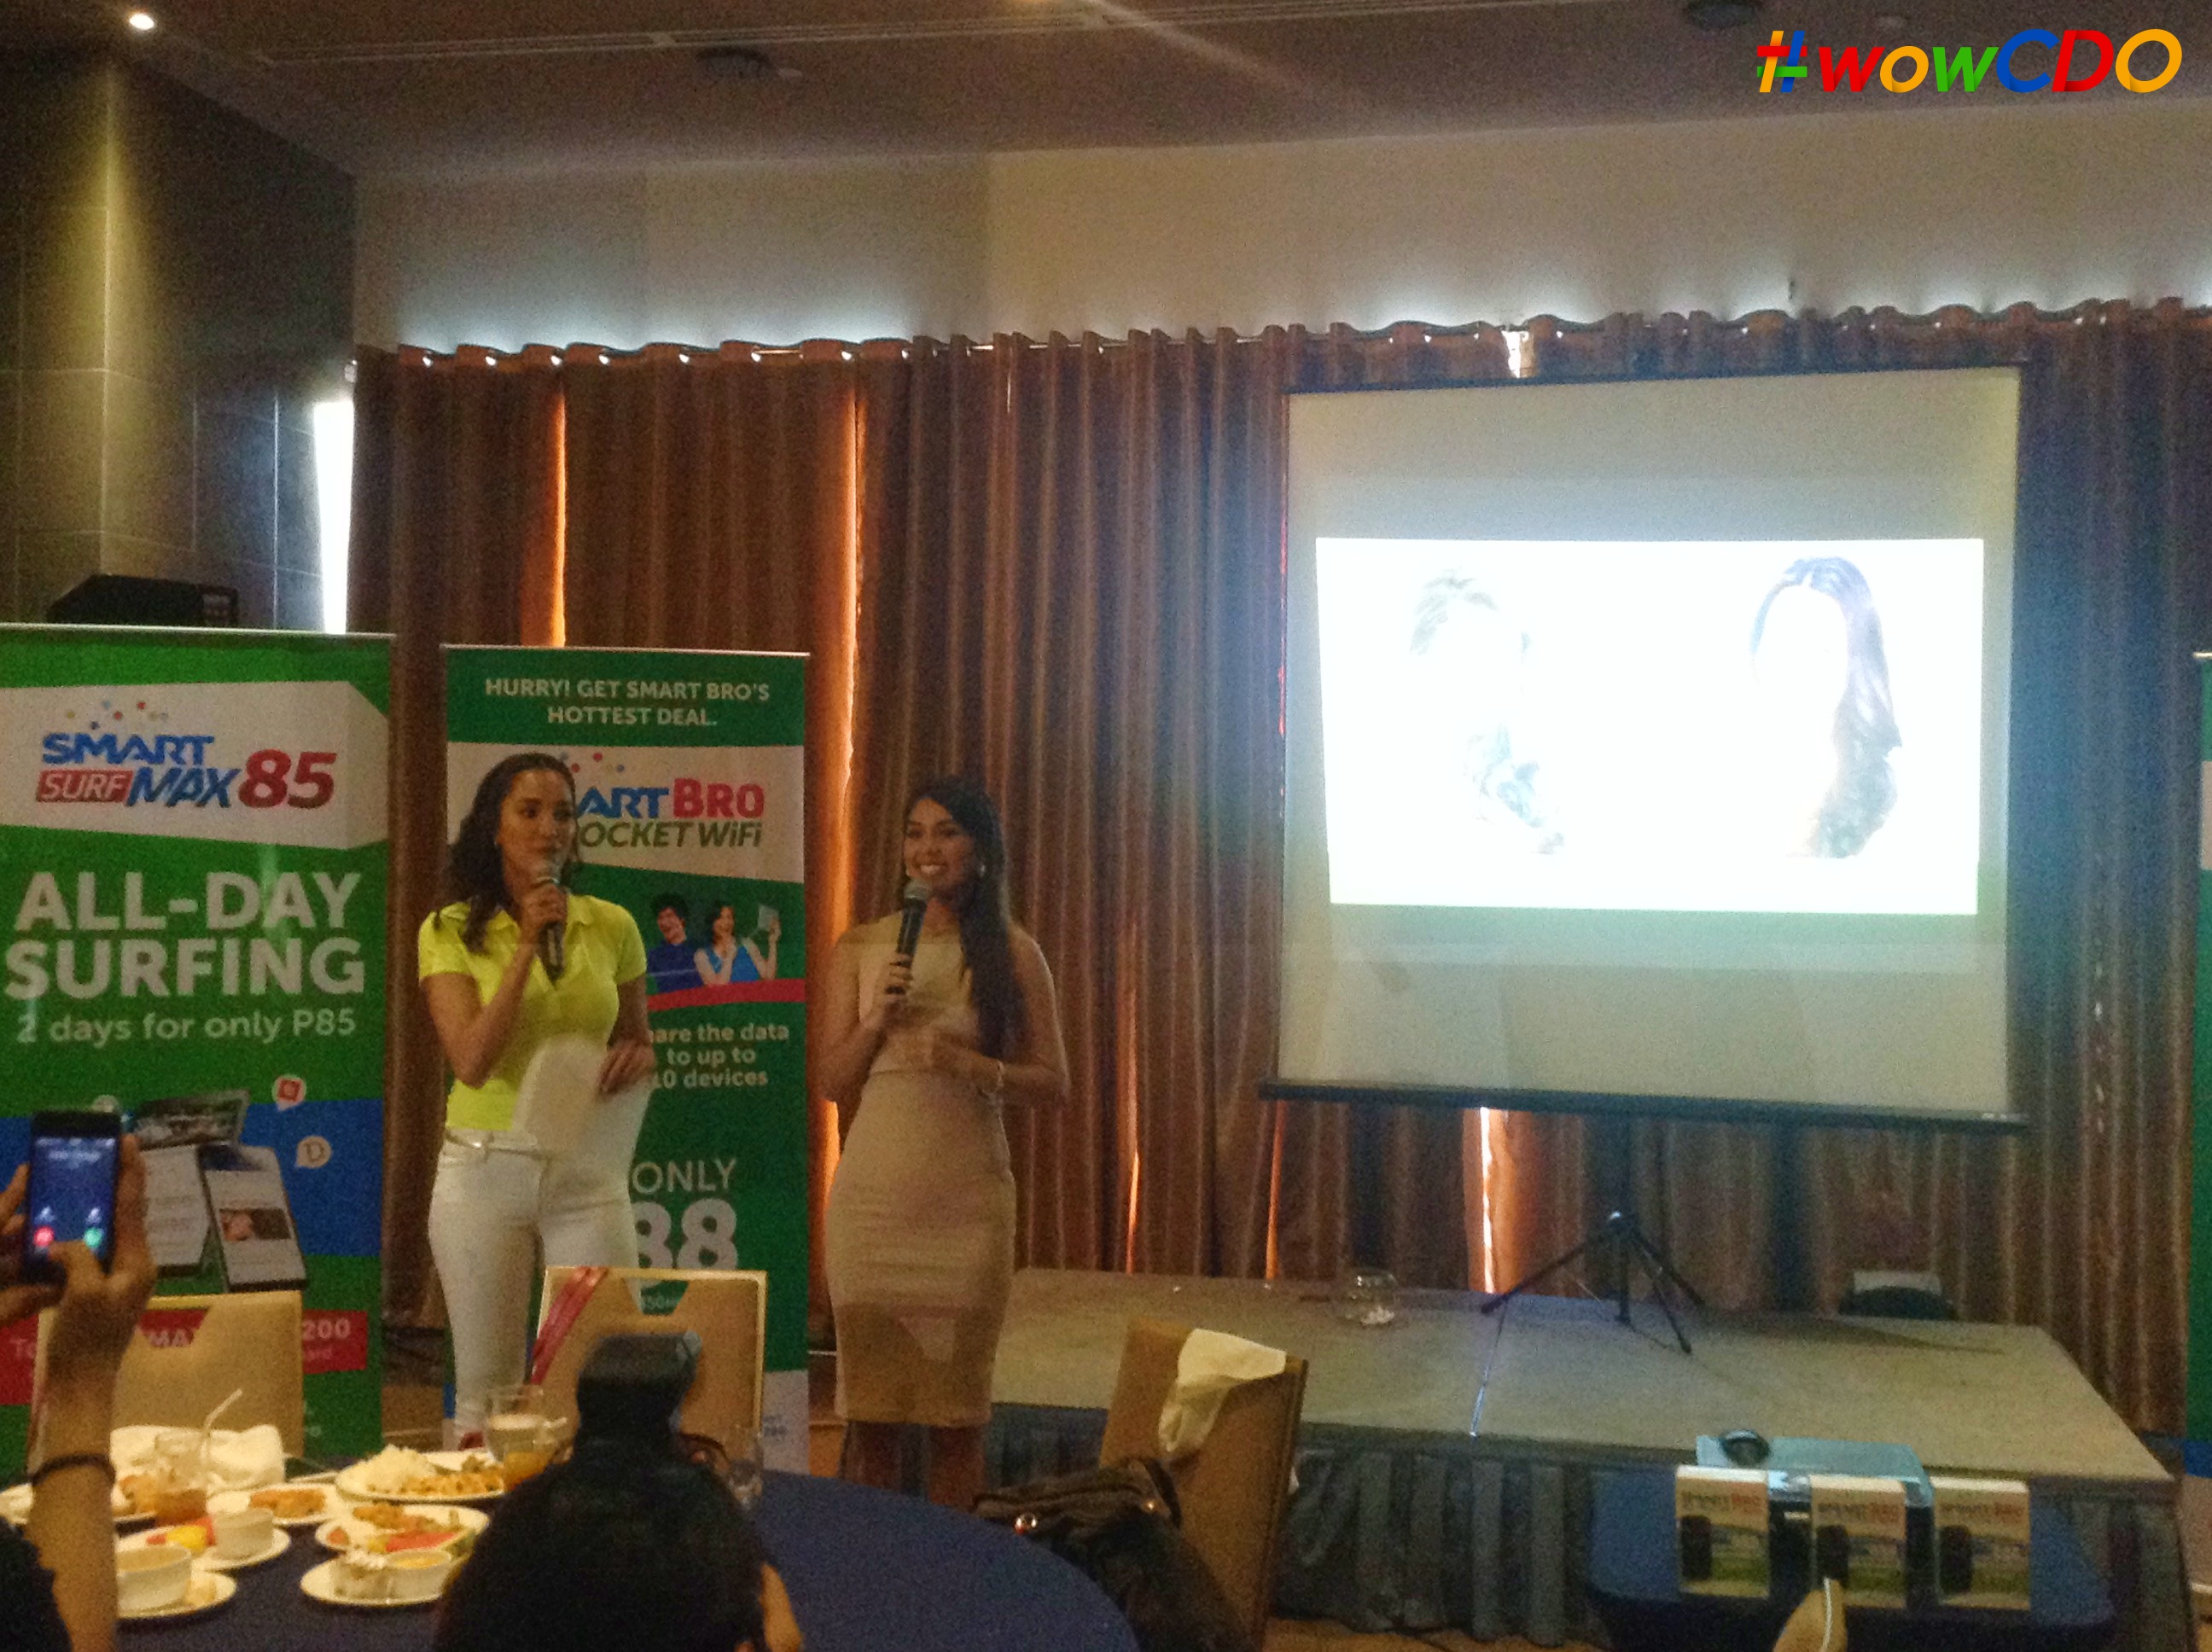 Ms. International 2013 Bea Rose Lastimosa and Ms. Universe-Philippines MJ Lastimosa during the Smart Bro 888 launch in CDO